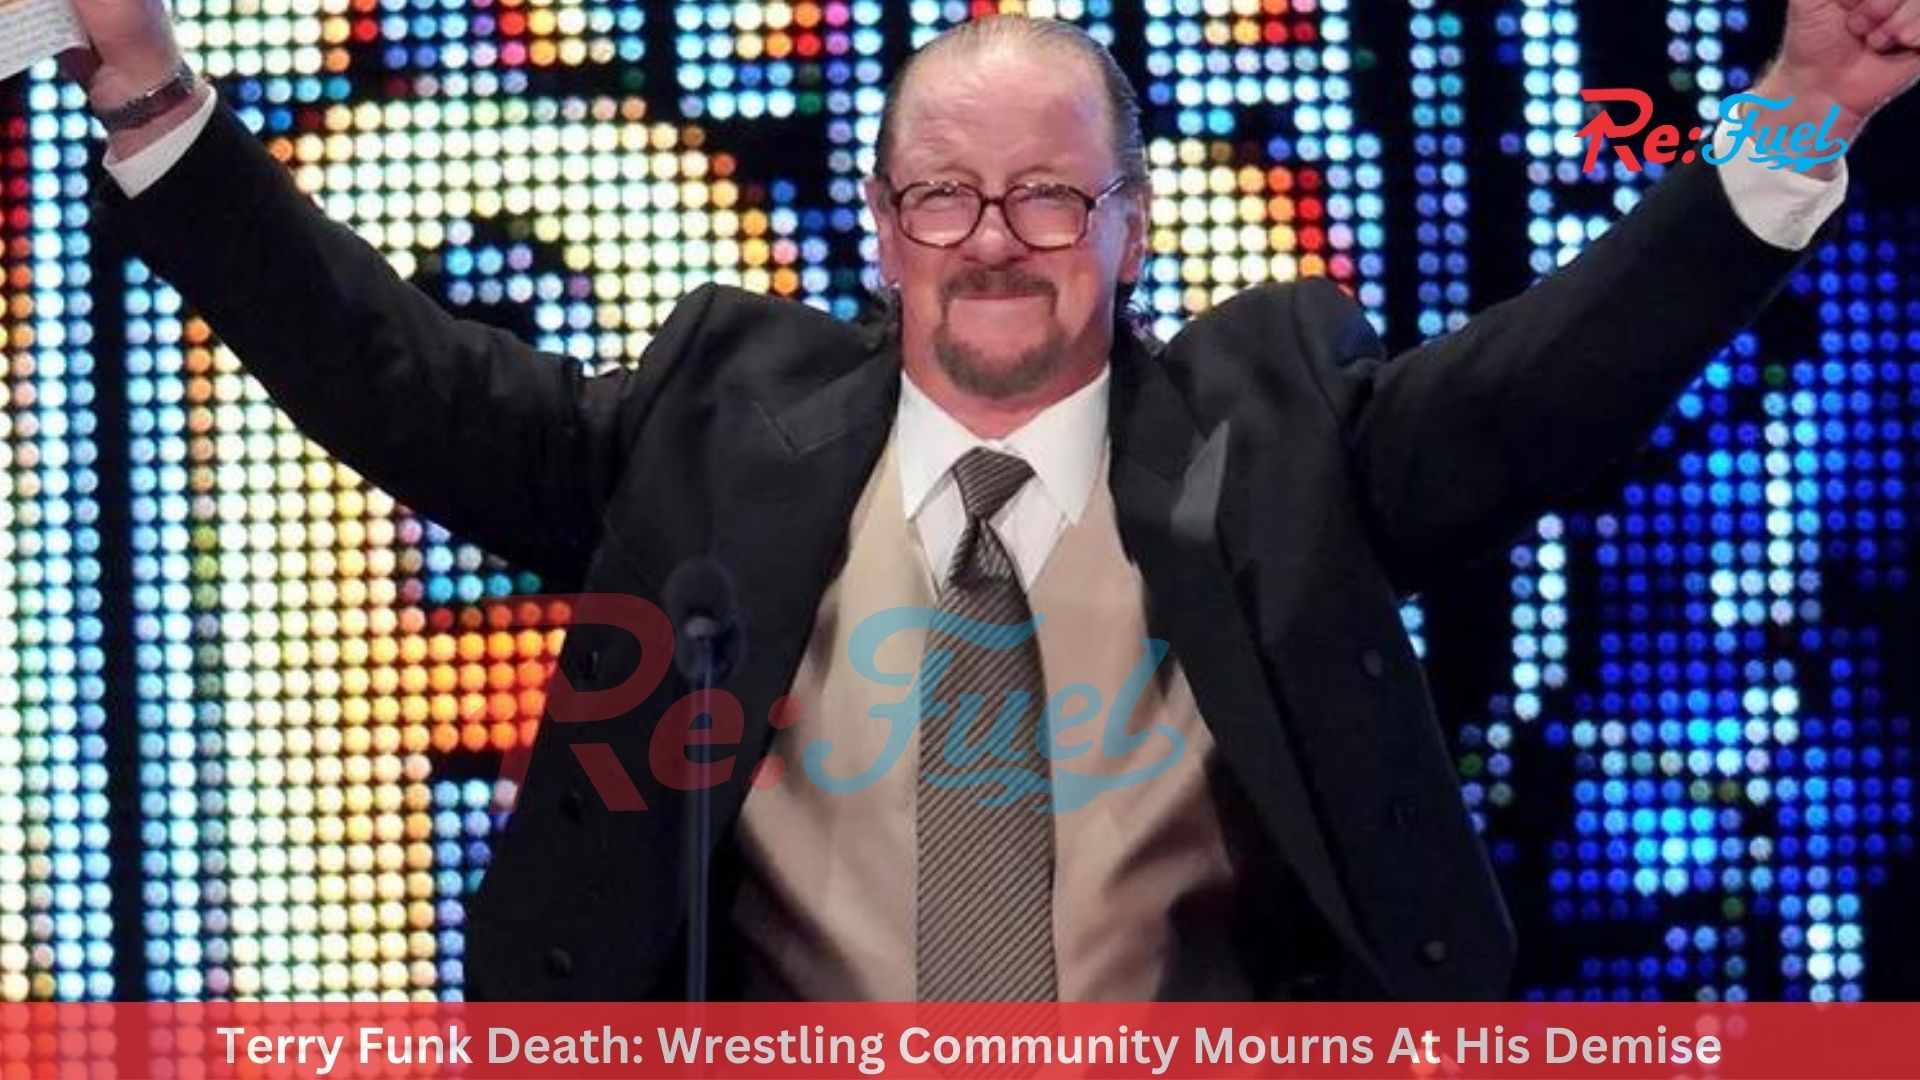 Terry Funk Death: Wrestling Community Mourns At His Demise